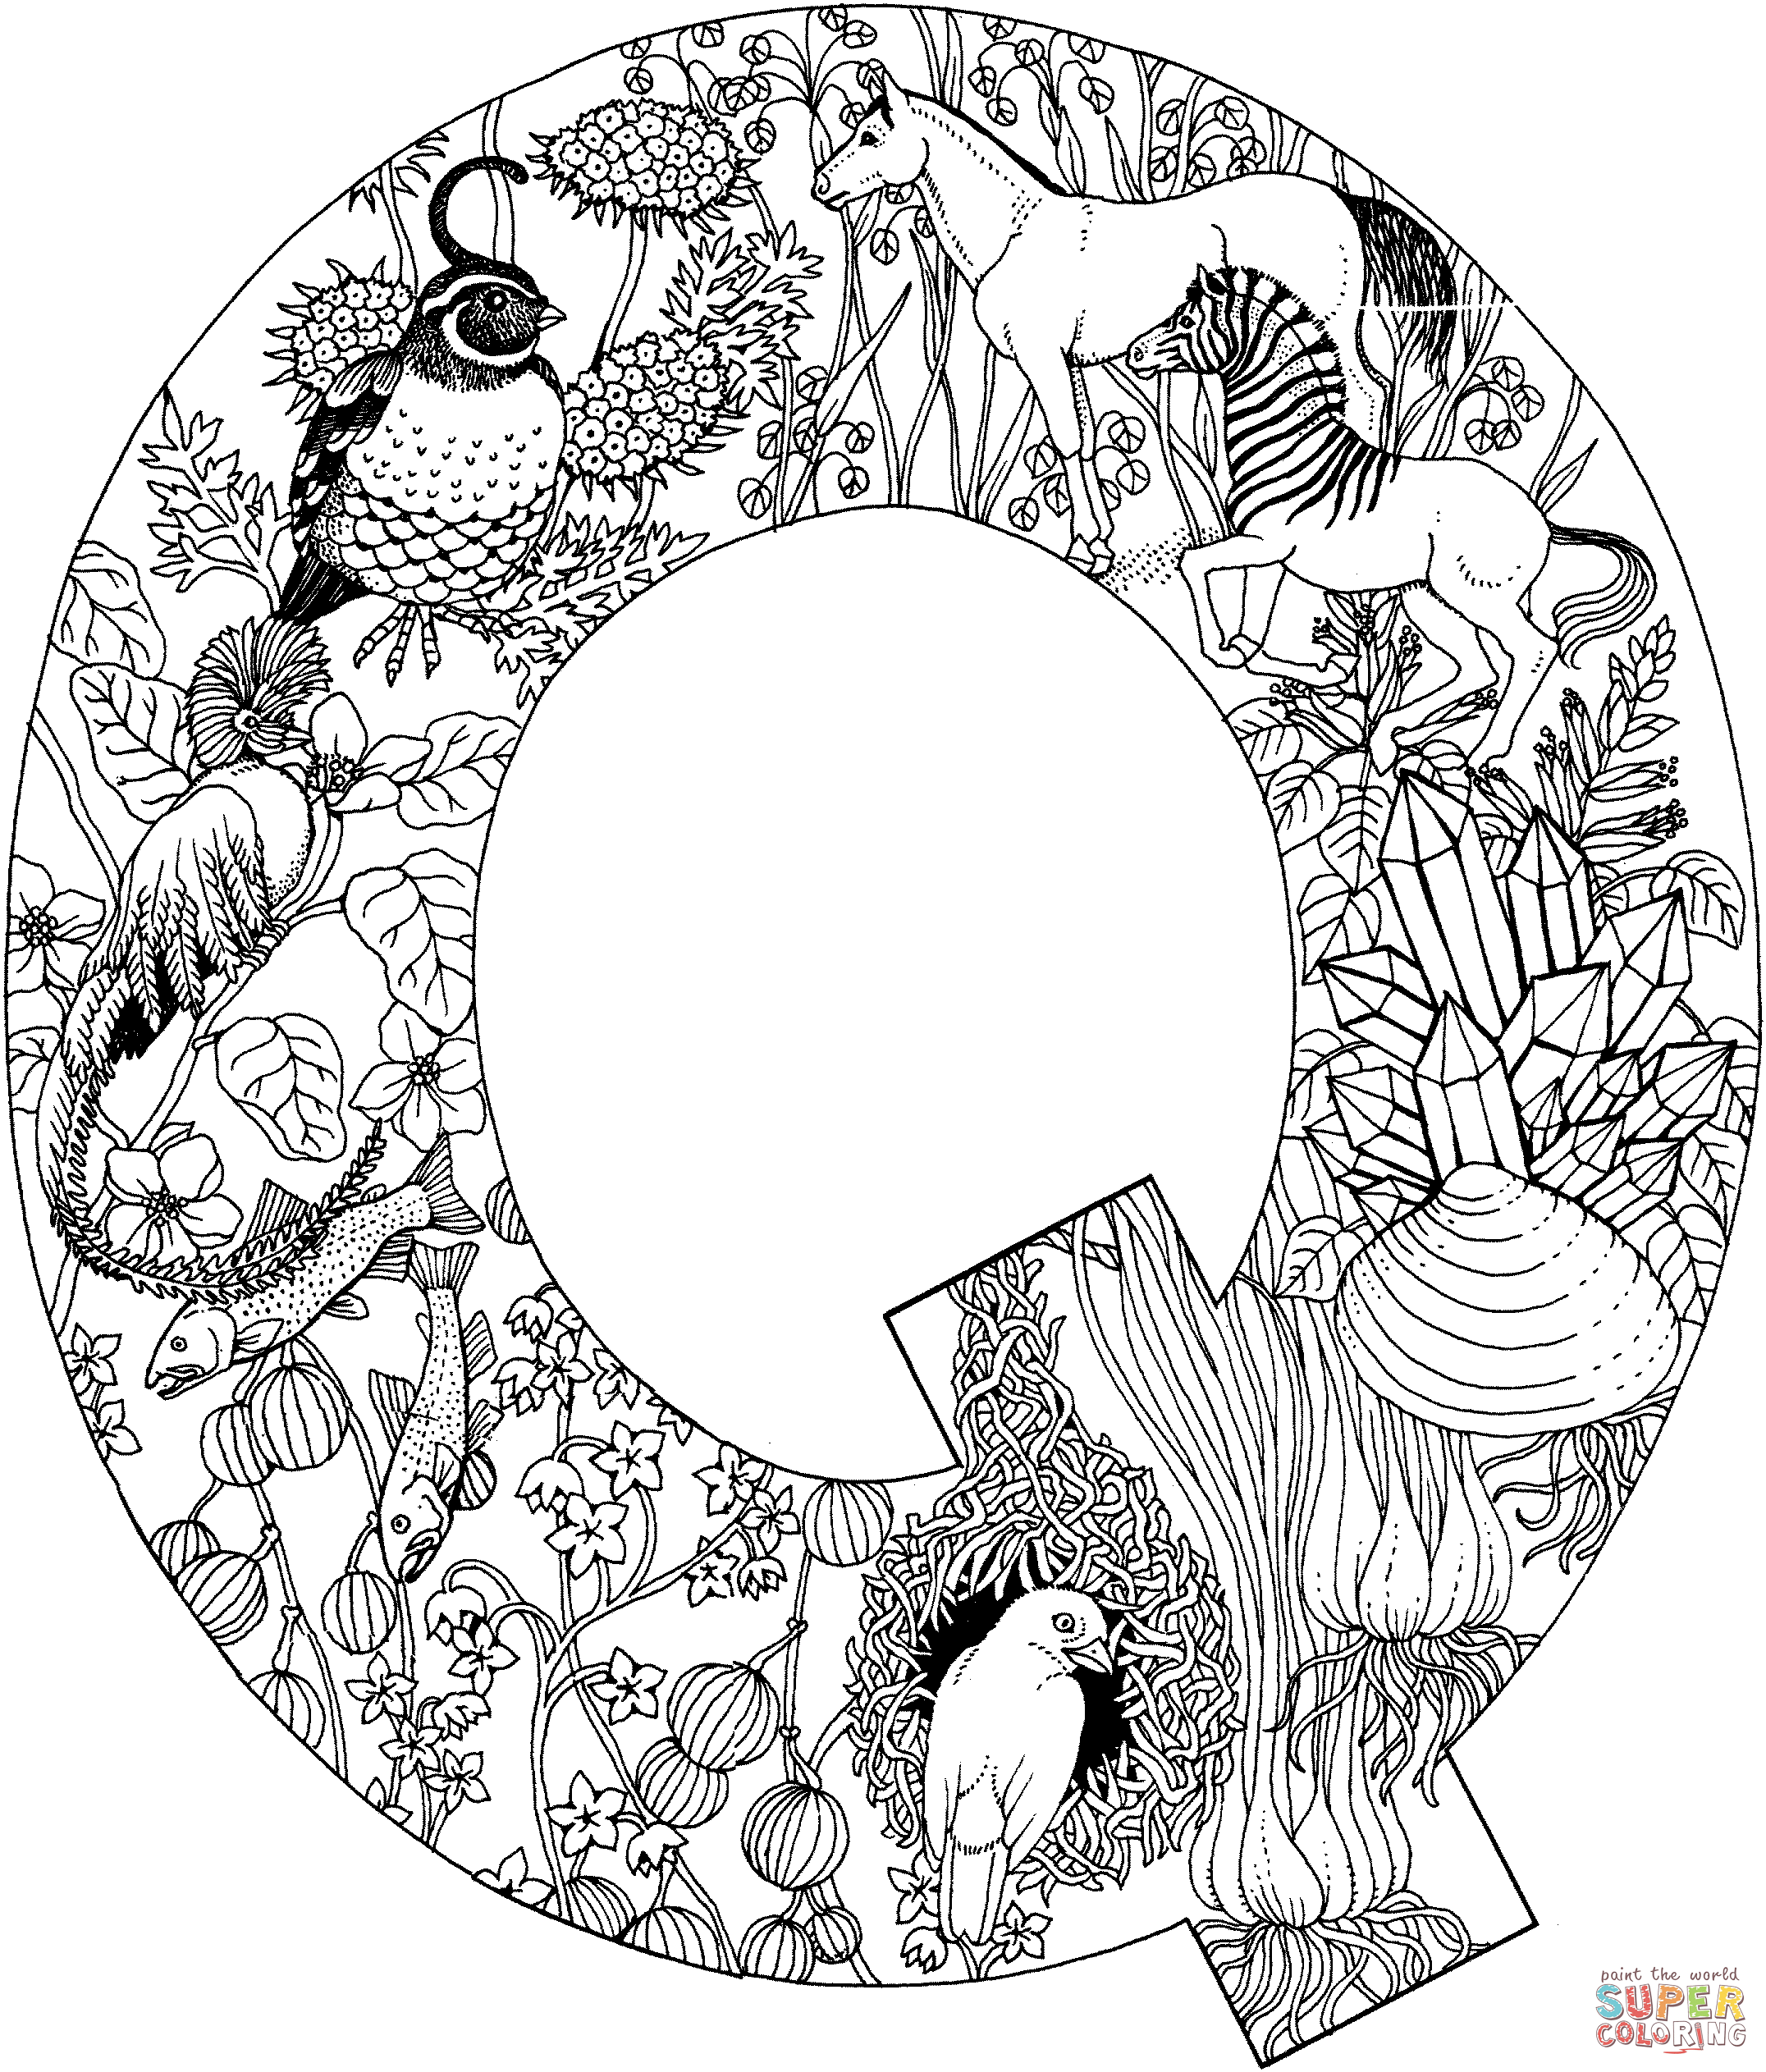 Letter Q coloring page | Free Printable Coloring Pages